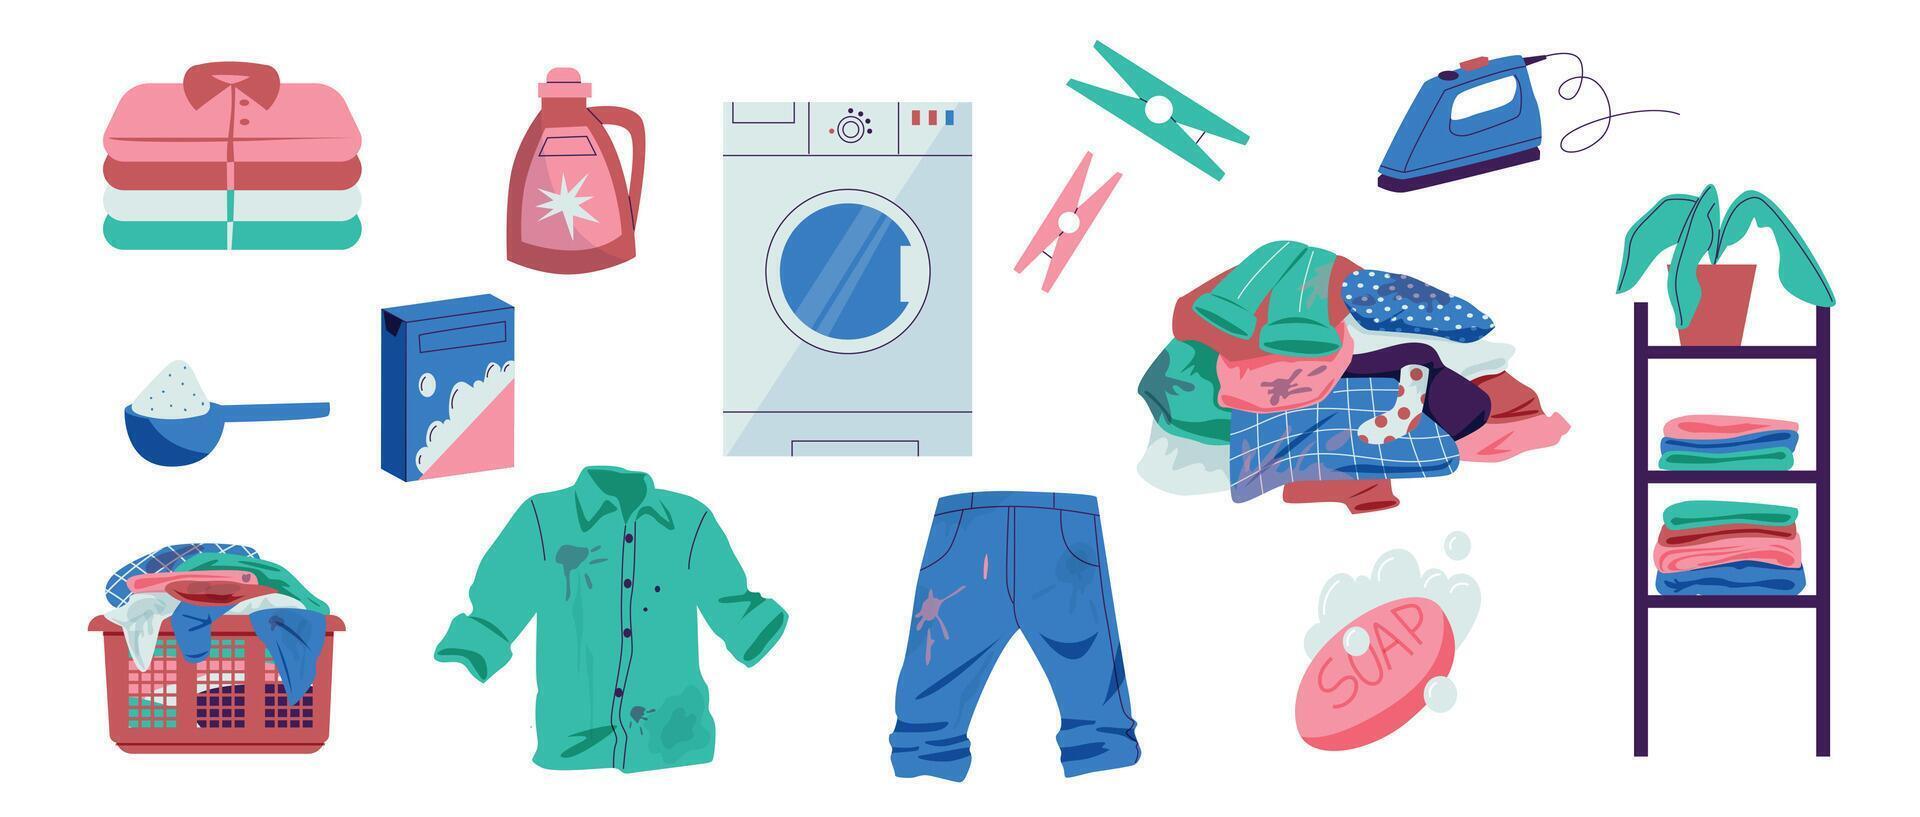 Home laundry. Cartoon dirty laundry in washing machine, laundry basket with clothes, detergent washer and bleach. Vector flat set